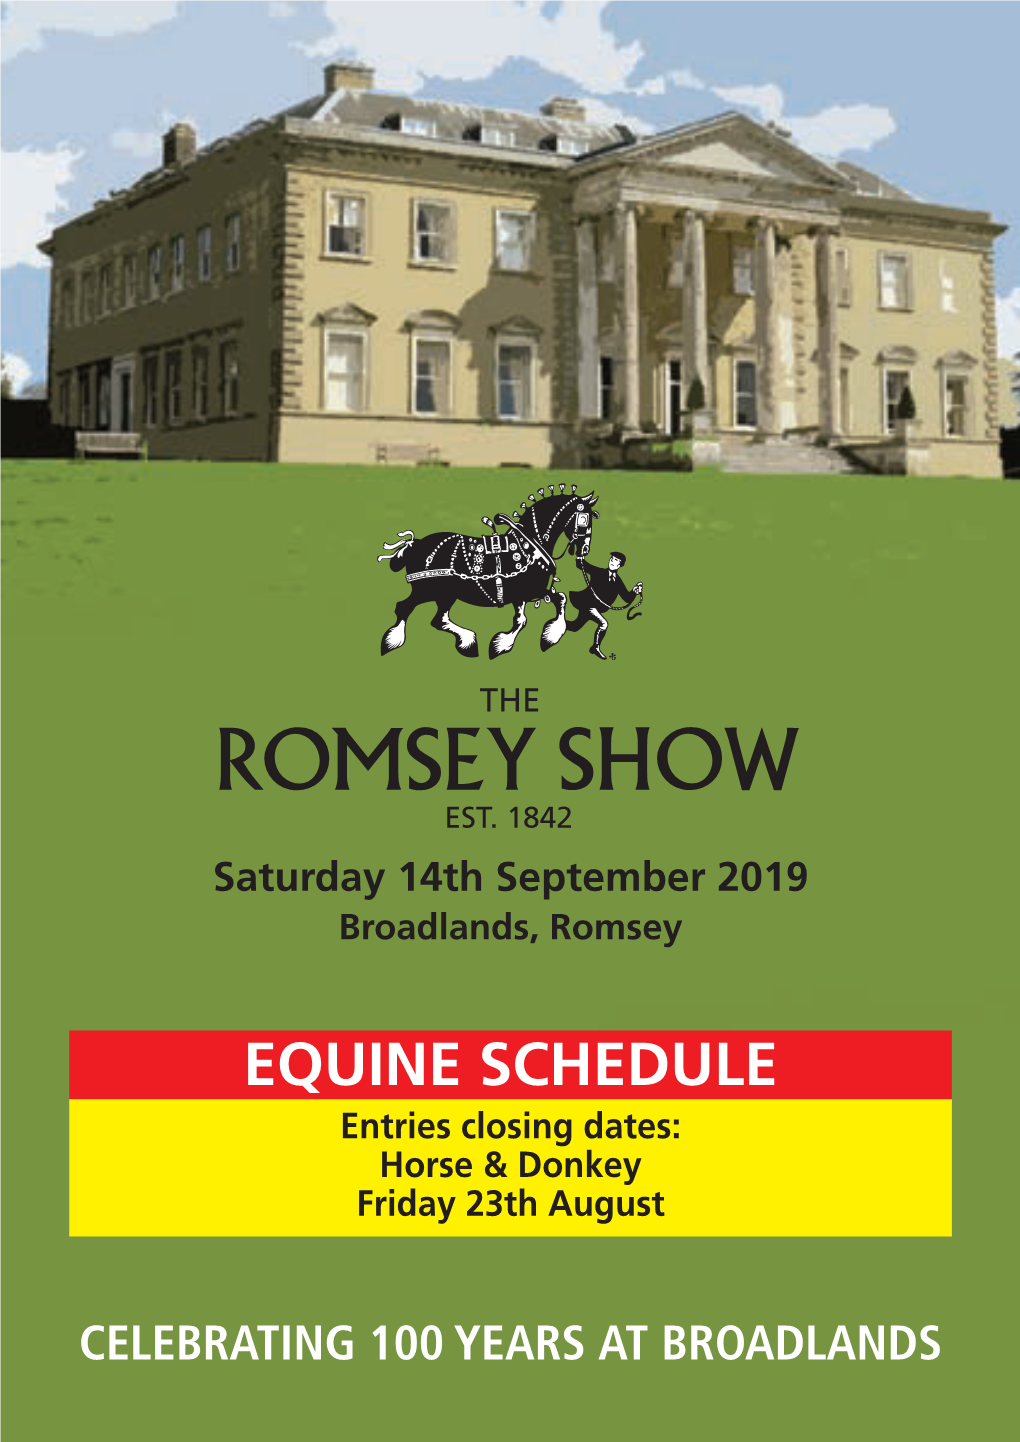 EQUINE SCHEDULE Entries Closing Dates: Horse & Donkey Friday 23Th August